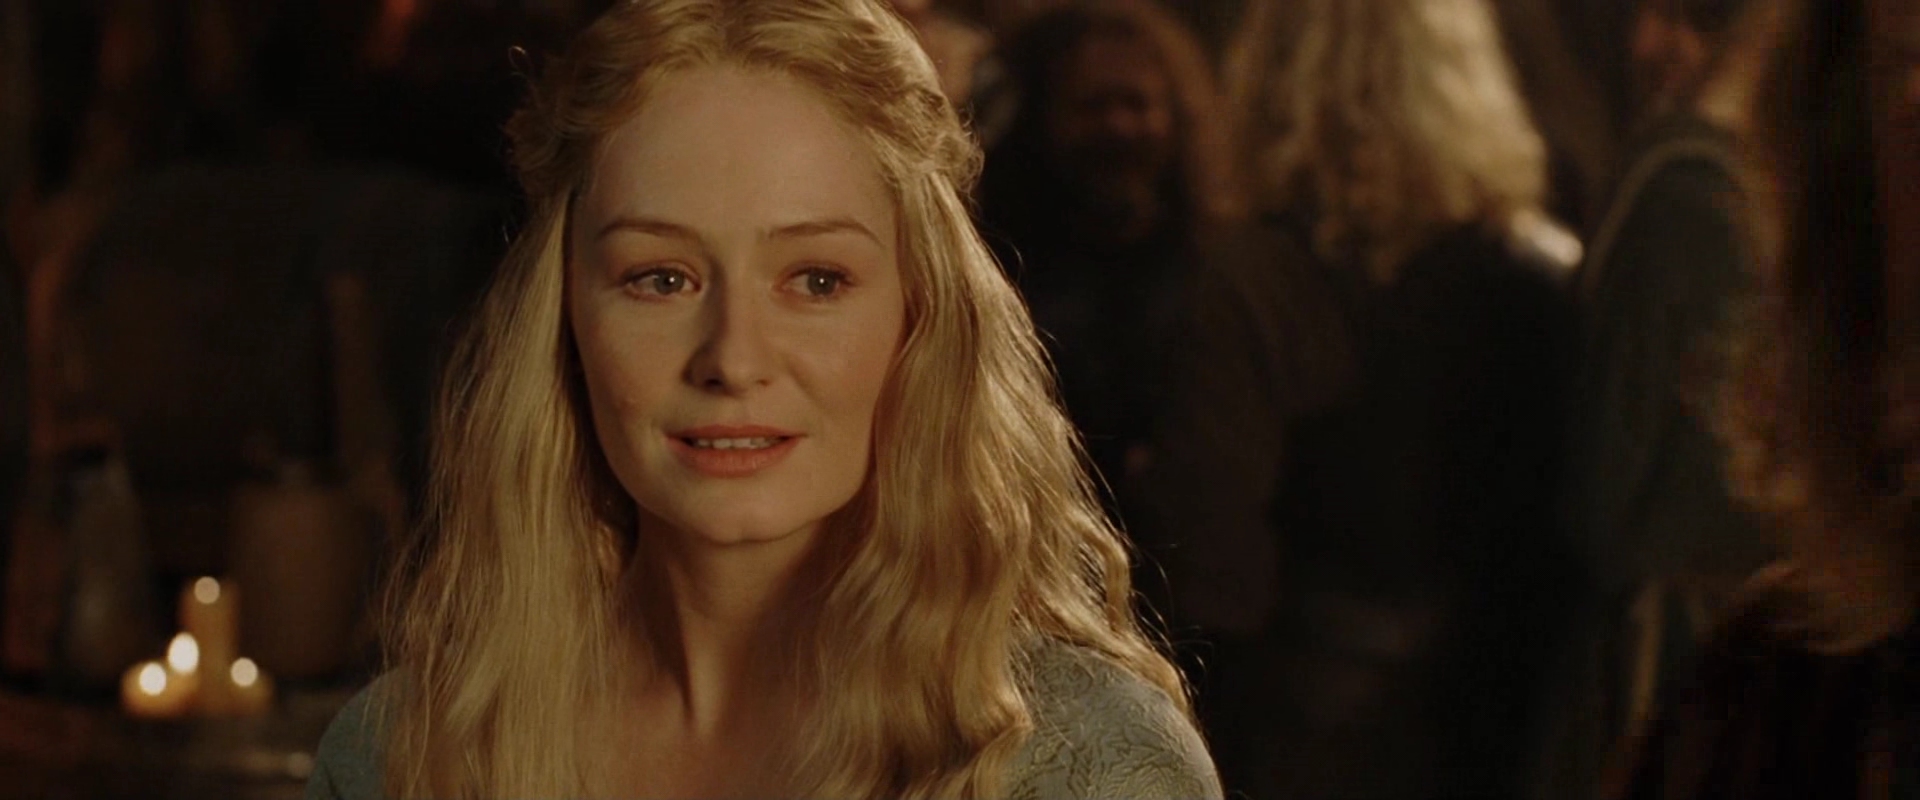 Eowyn looks at Aragorn in the halls of the Rohirrim.